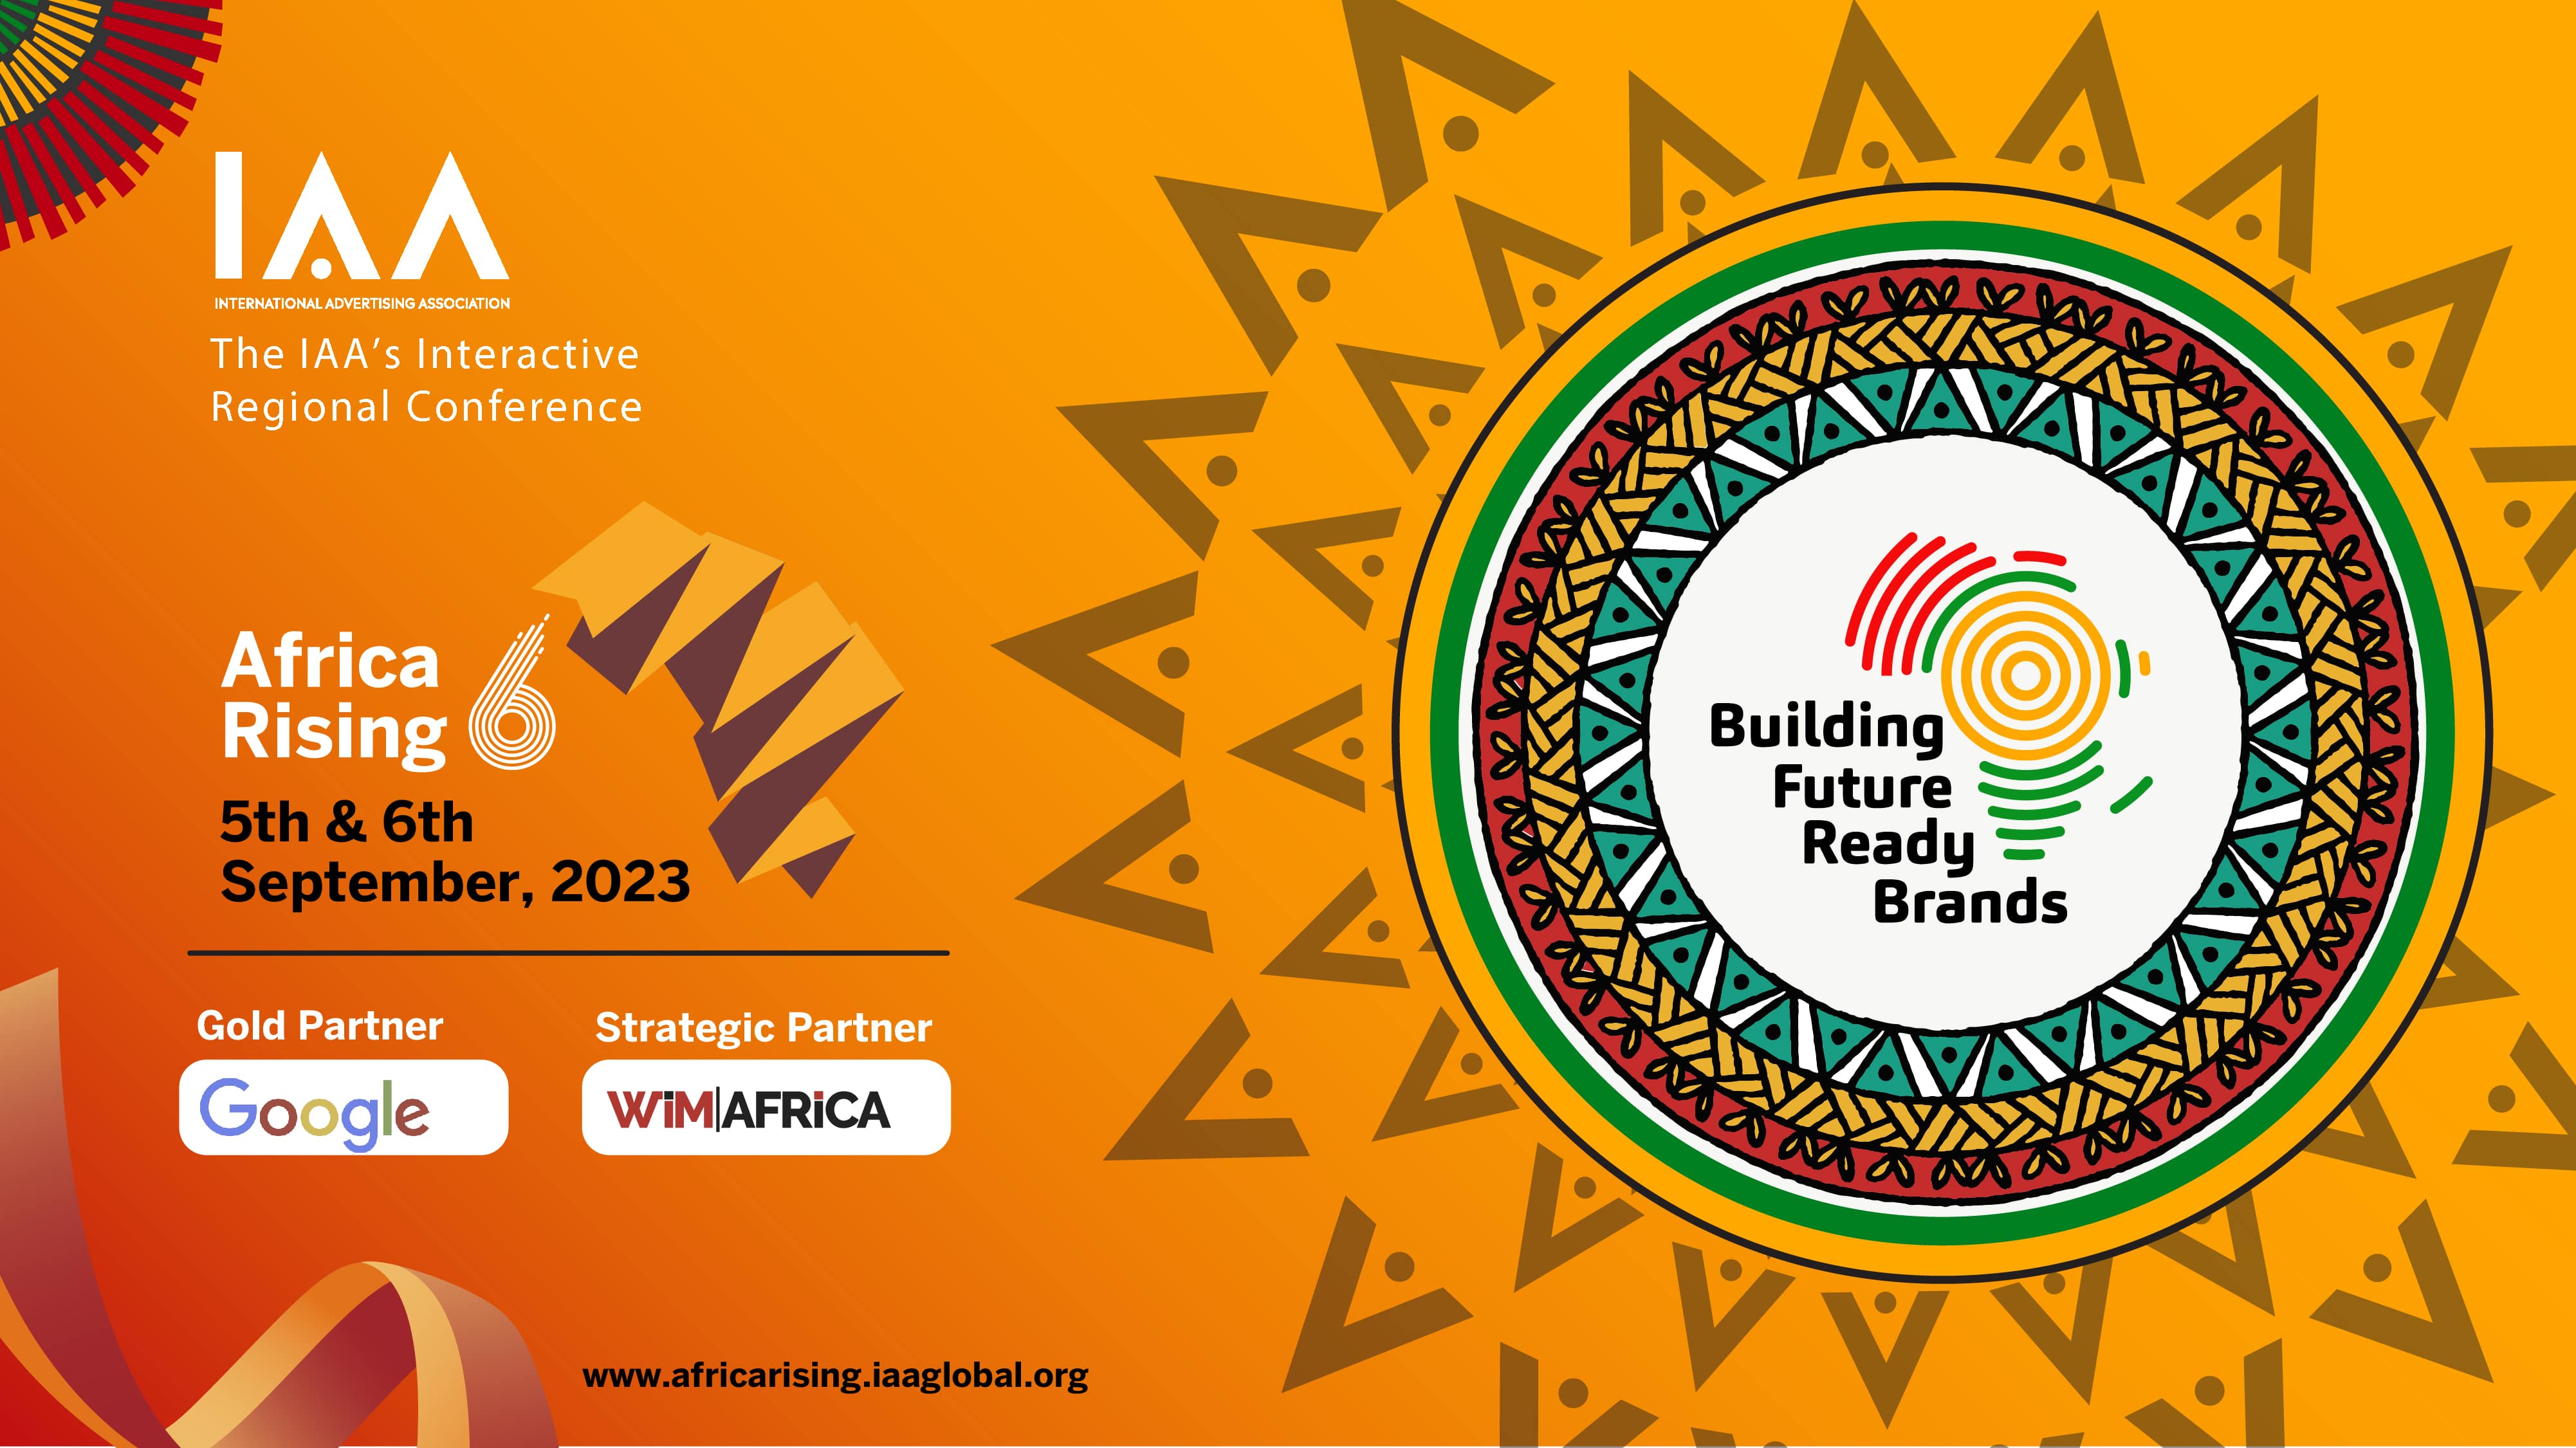 Africa Rising 6《Building Future Ready Brands》